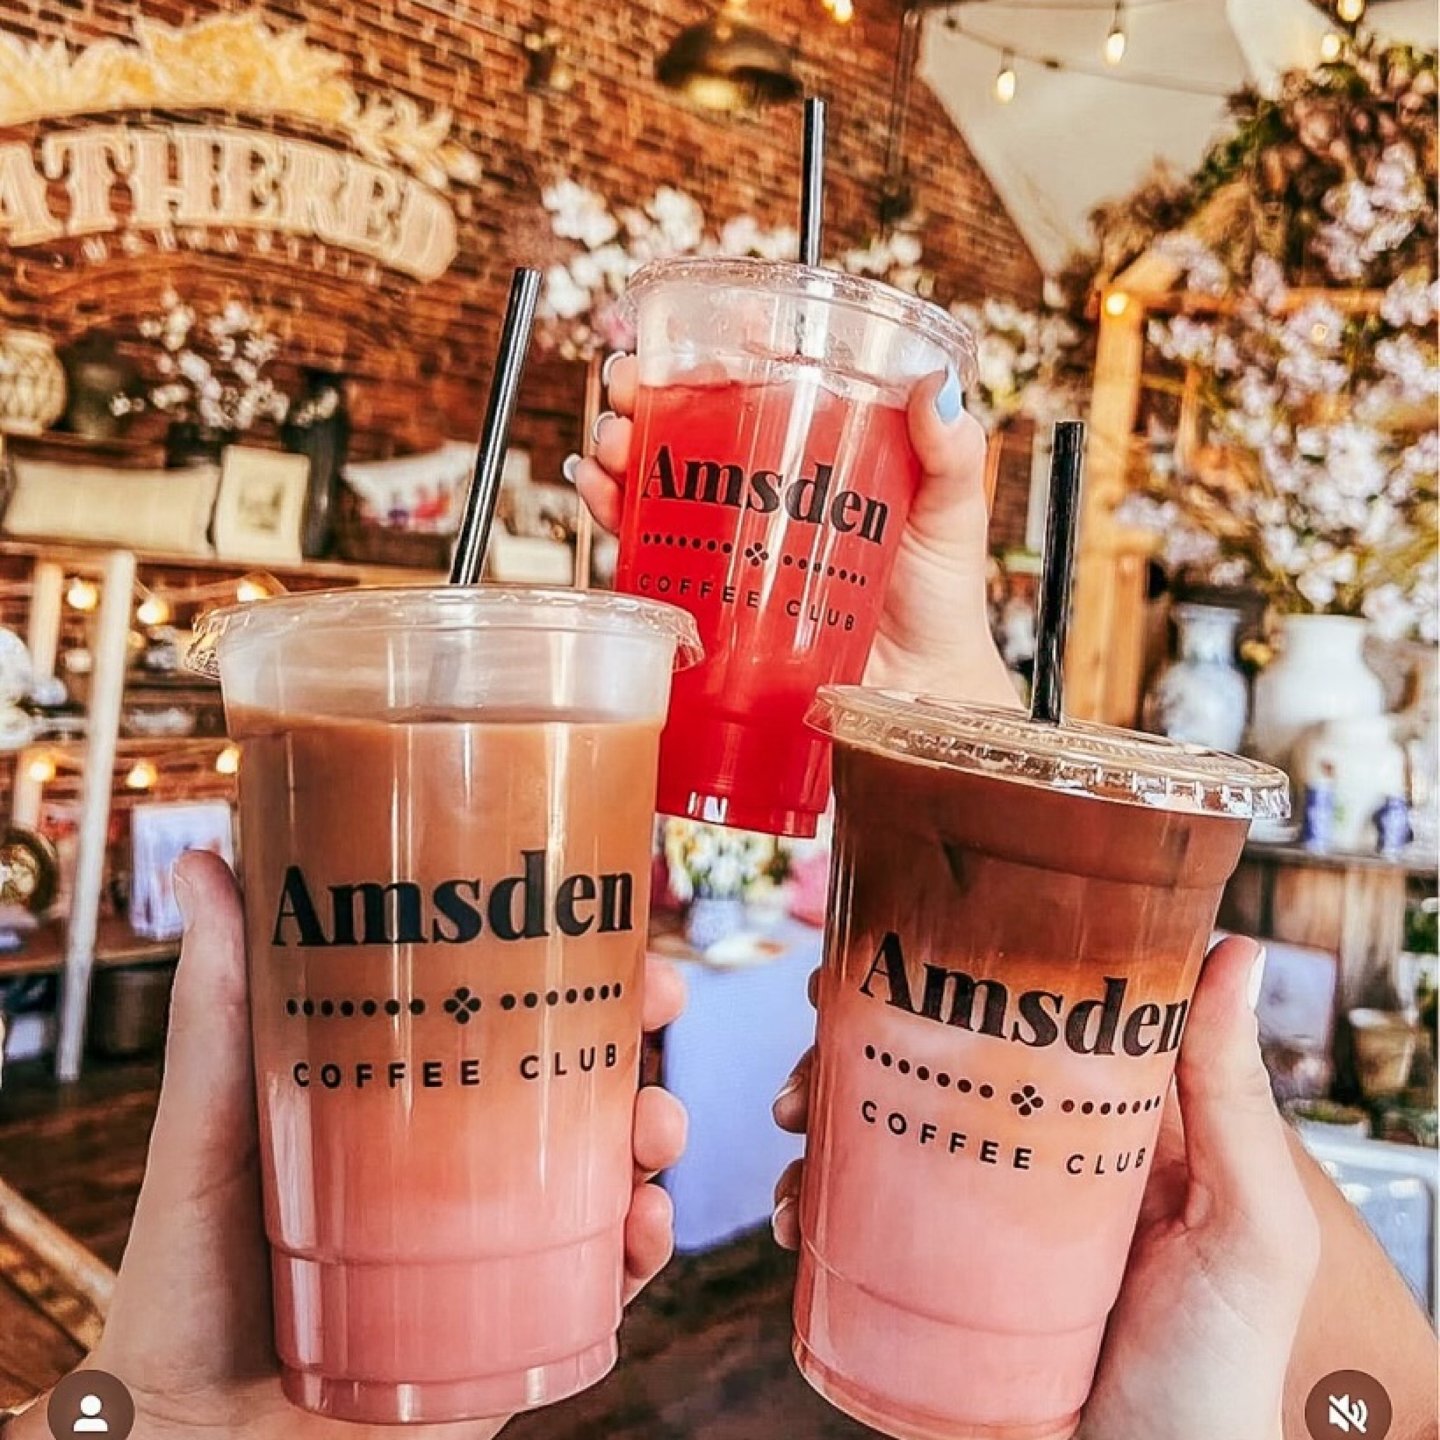 Sippin' on sunshine and sweetness at The Amsden! 🍋☀️ @annieyatess sure knows how to capture the flavor-packed vibes of our iced white chocolate raspberry mocha and strawberry lemonade! Ready to sip, smile, and soak up the Sunday fun! 😋🍹

#theamsde